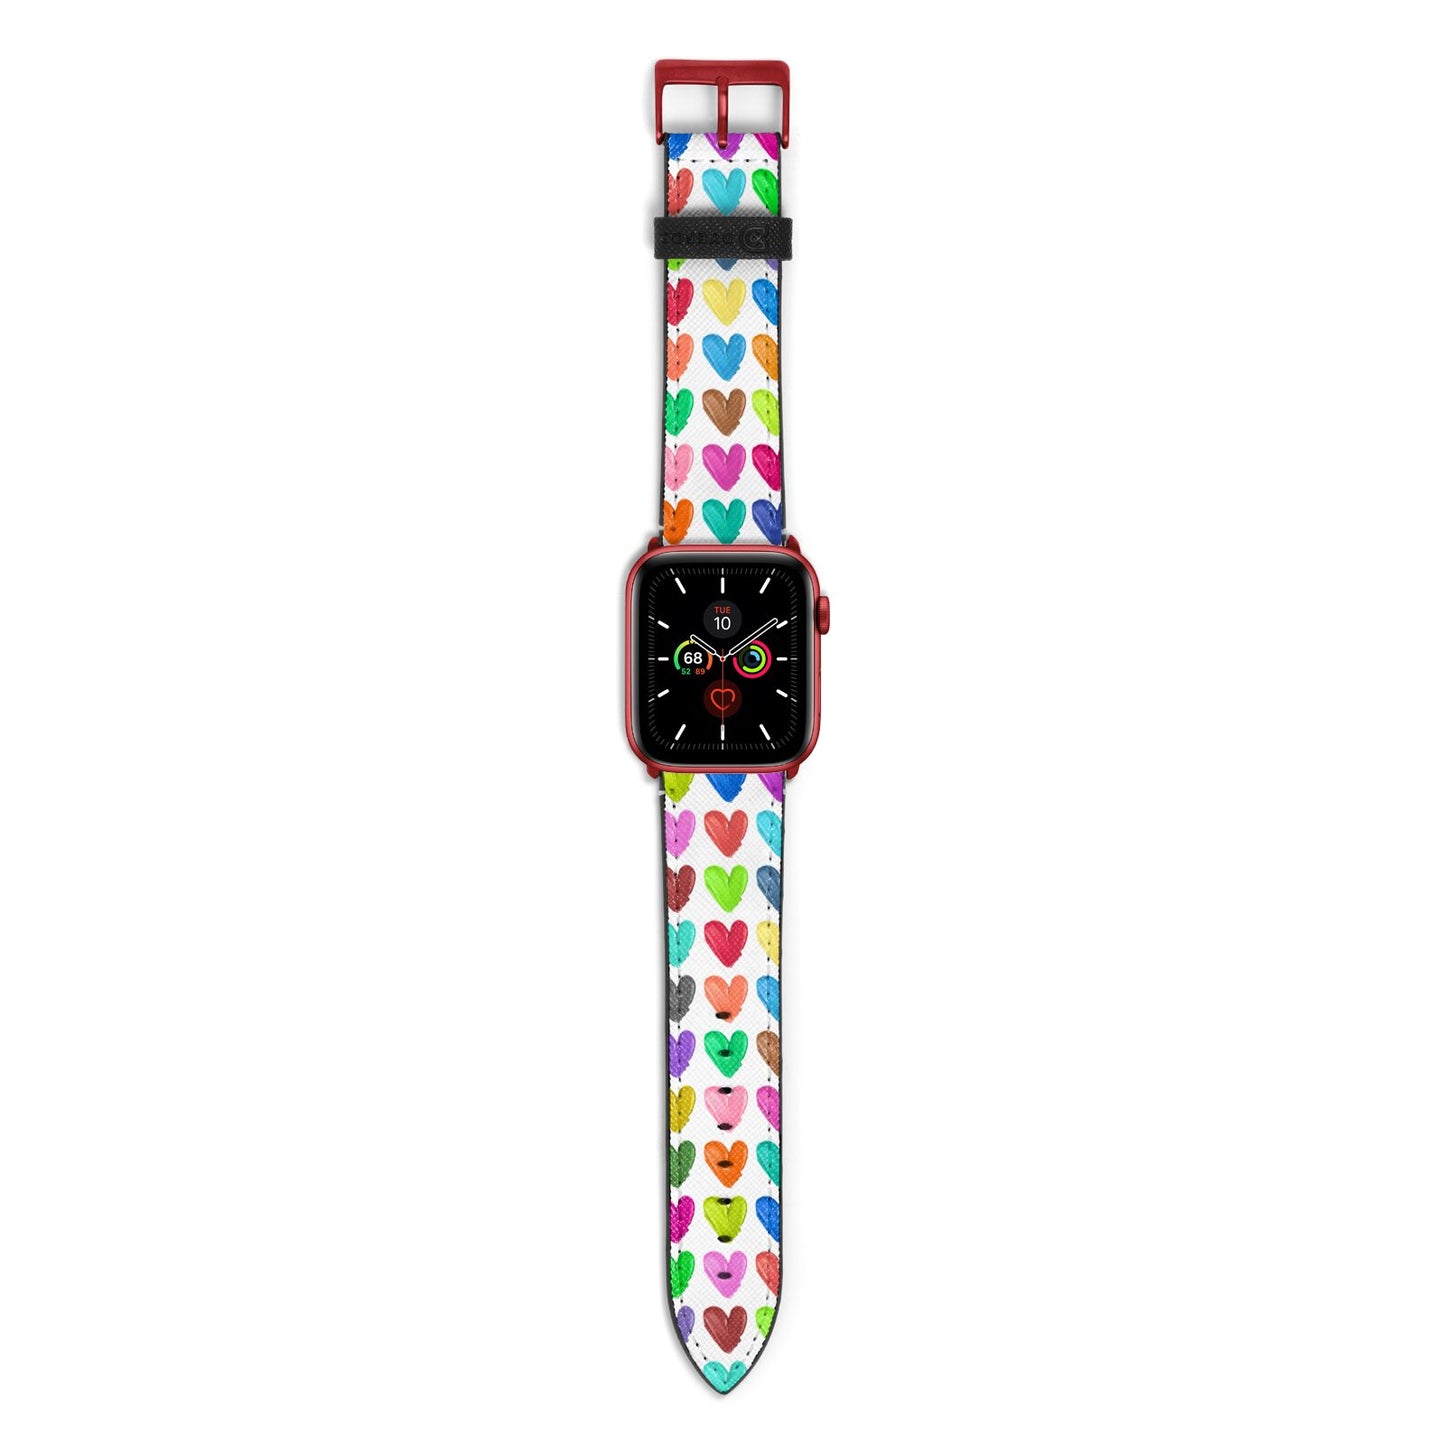 Polka Heart Apple Watch Strap with Red Hardware